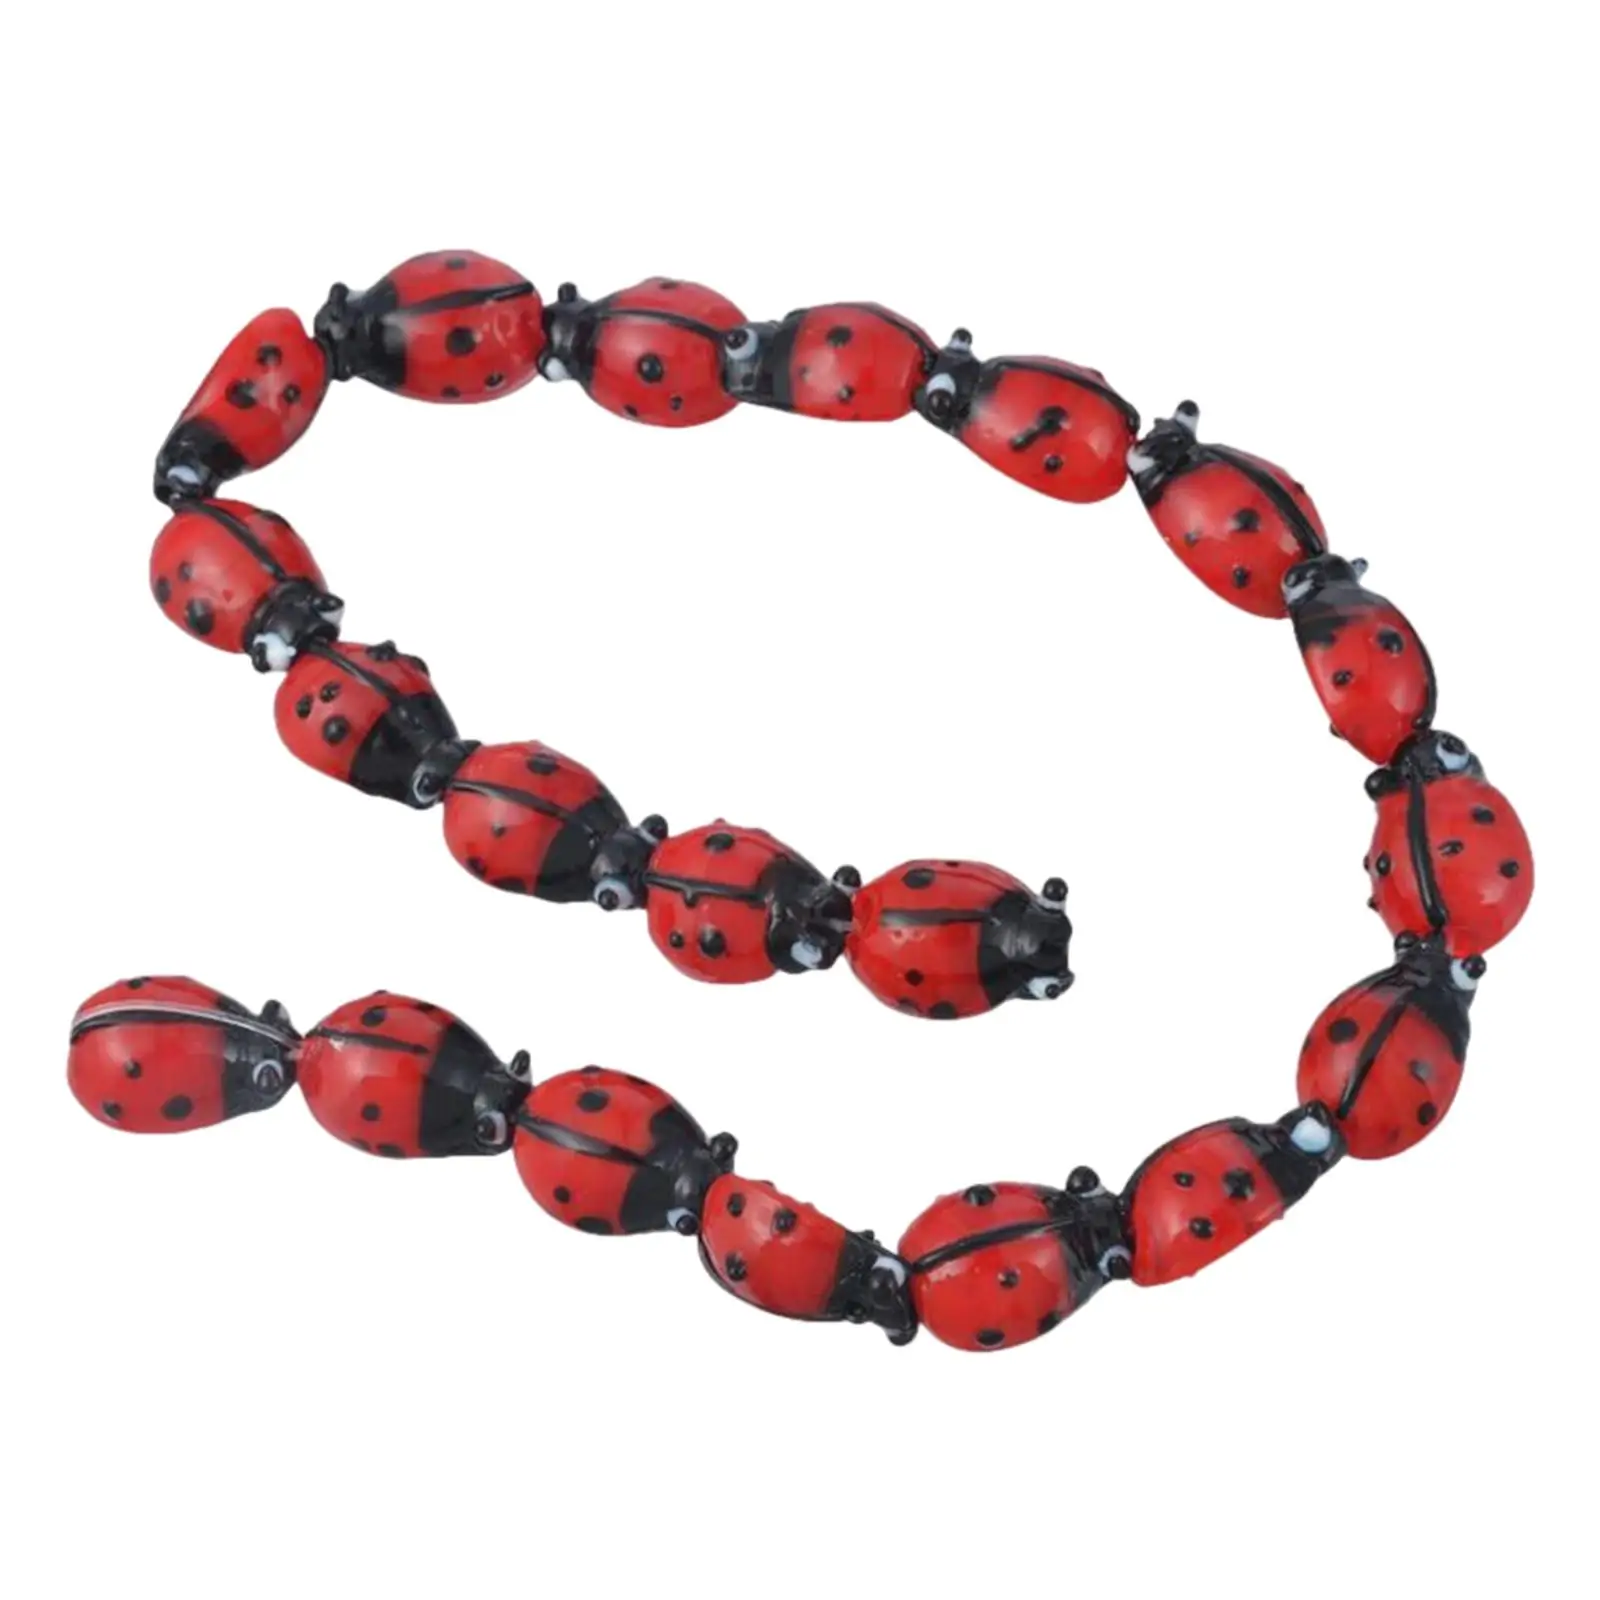 Cute Beetle Spacer Beads Set Crafts Carved Accessories Supplies Charm Red for Craft Making Decoration Pendant Halloween Earrings